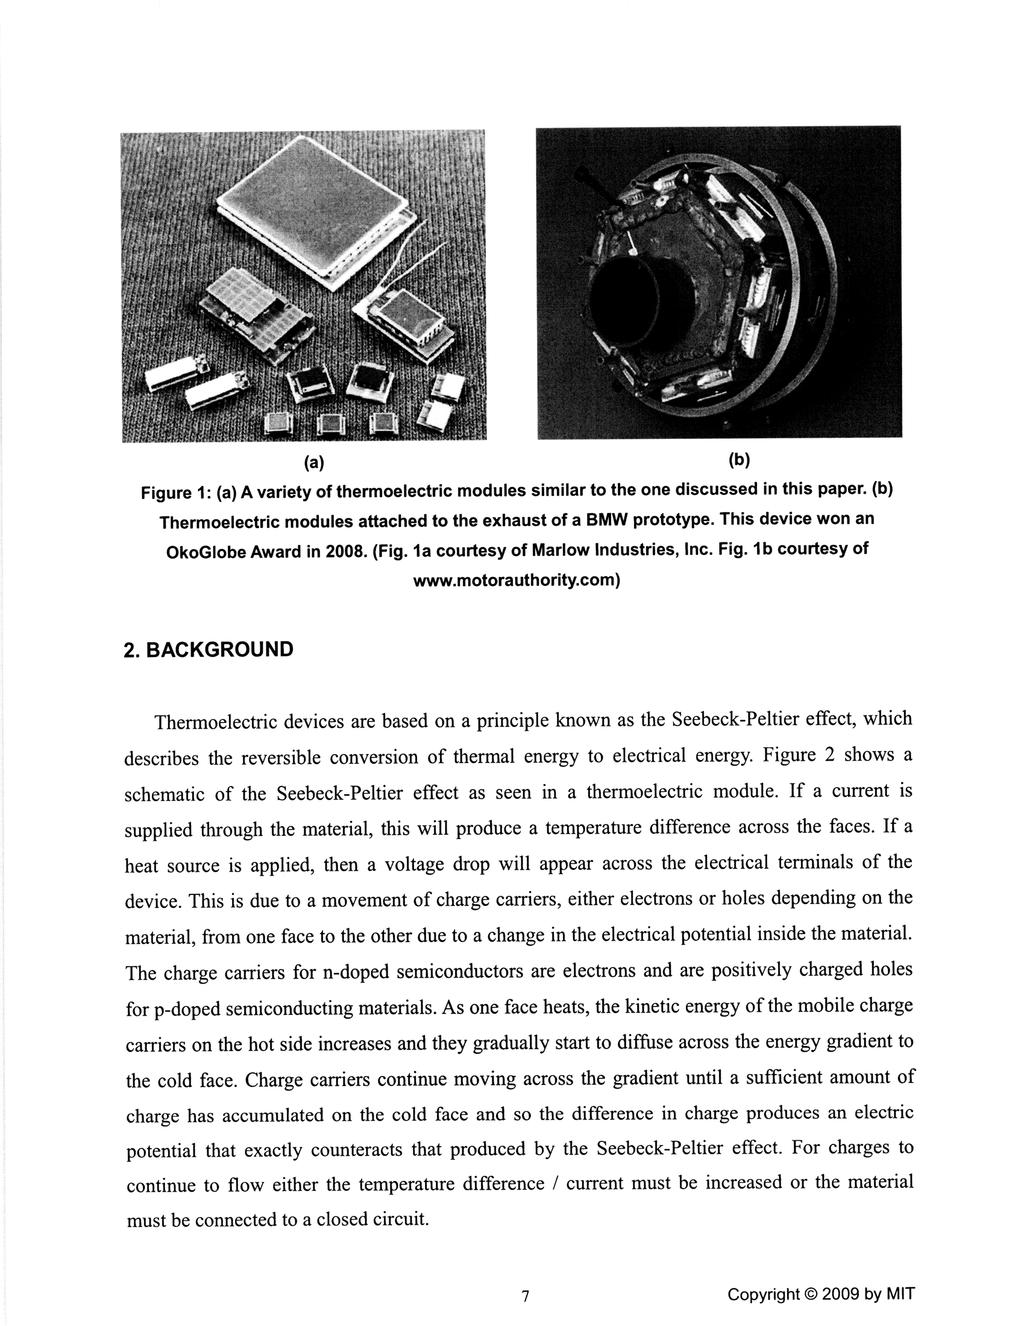 (a) (b) Figure 1: (a) A variety of thermoelectric modules similar to the one discussed in this paper. (b) Thermoelectric modules attached to the exhaust of a BMW prototype.